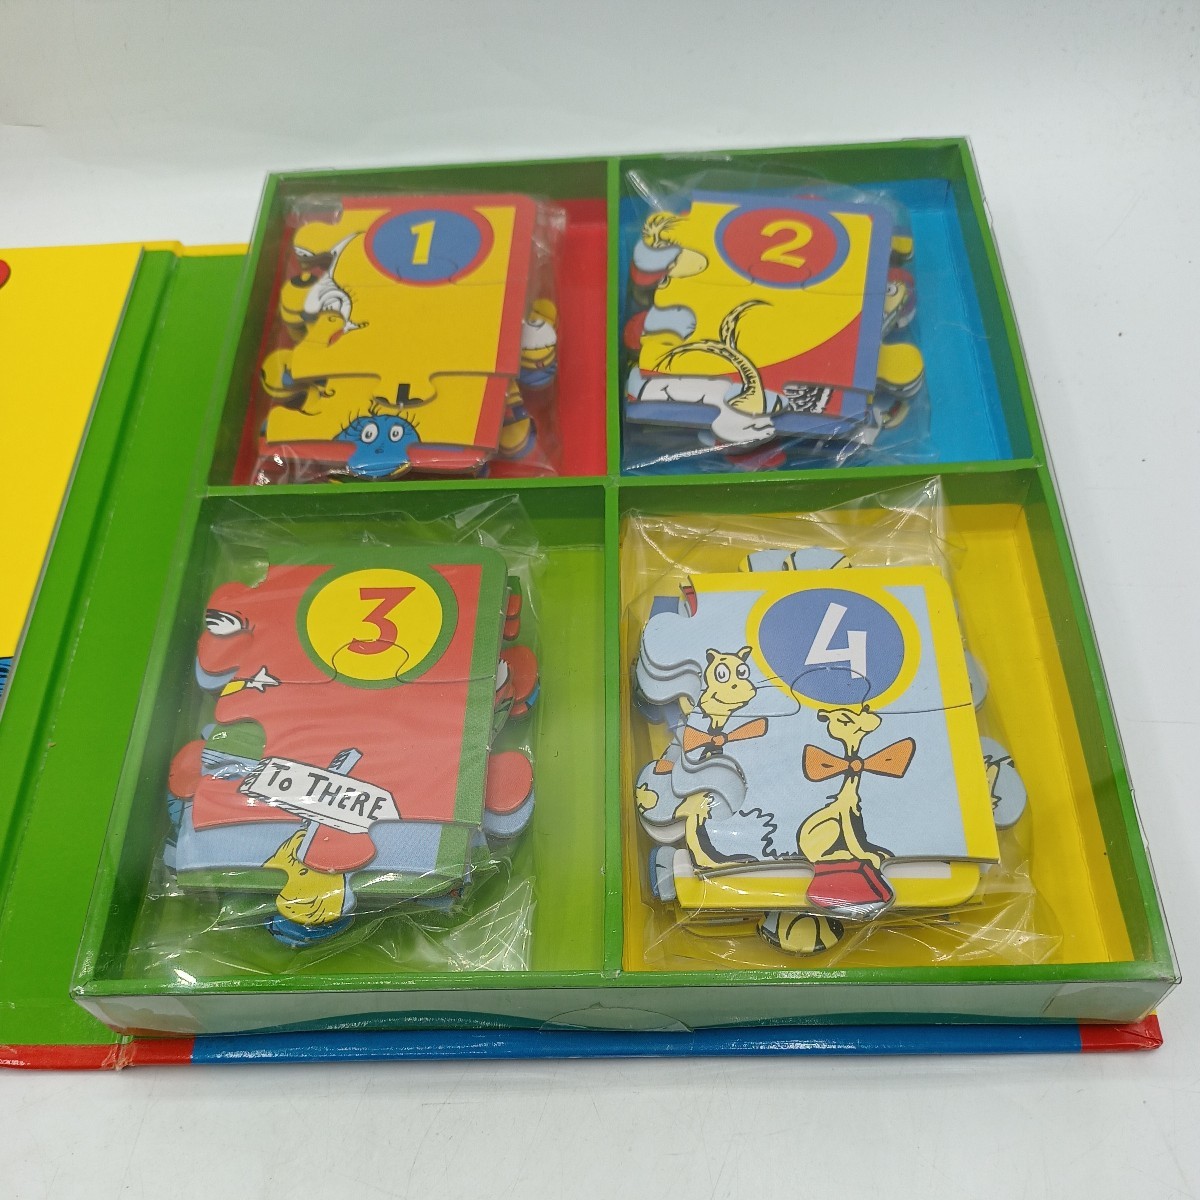 L3003 *Dr.Seuss Puzzle Storydokta-* Hsu s puzzle -stroke - Lee 24 piece jigsaw puzzle unused goods intellectual training toy learning English .